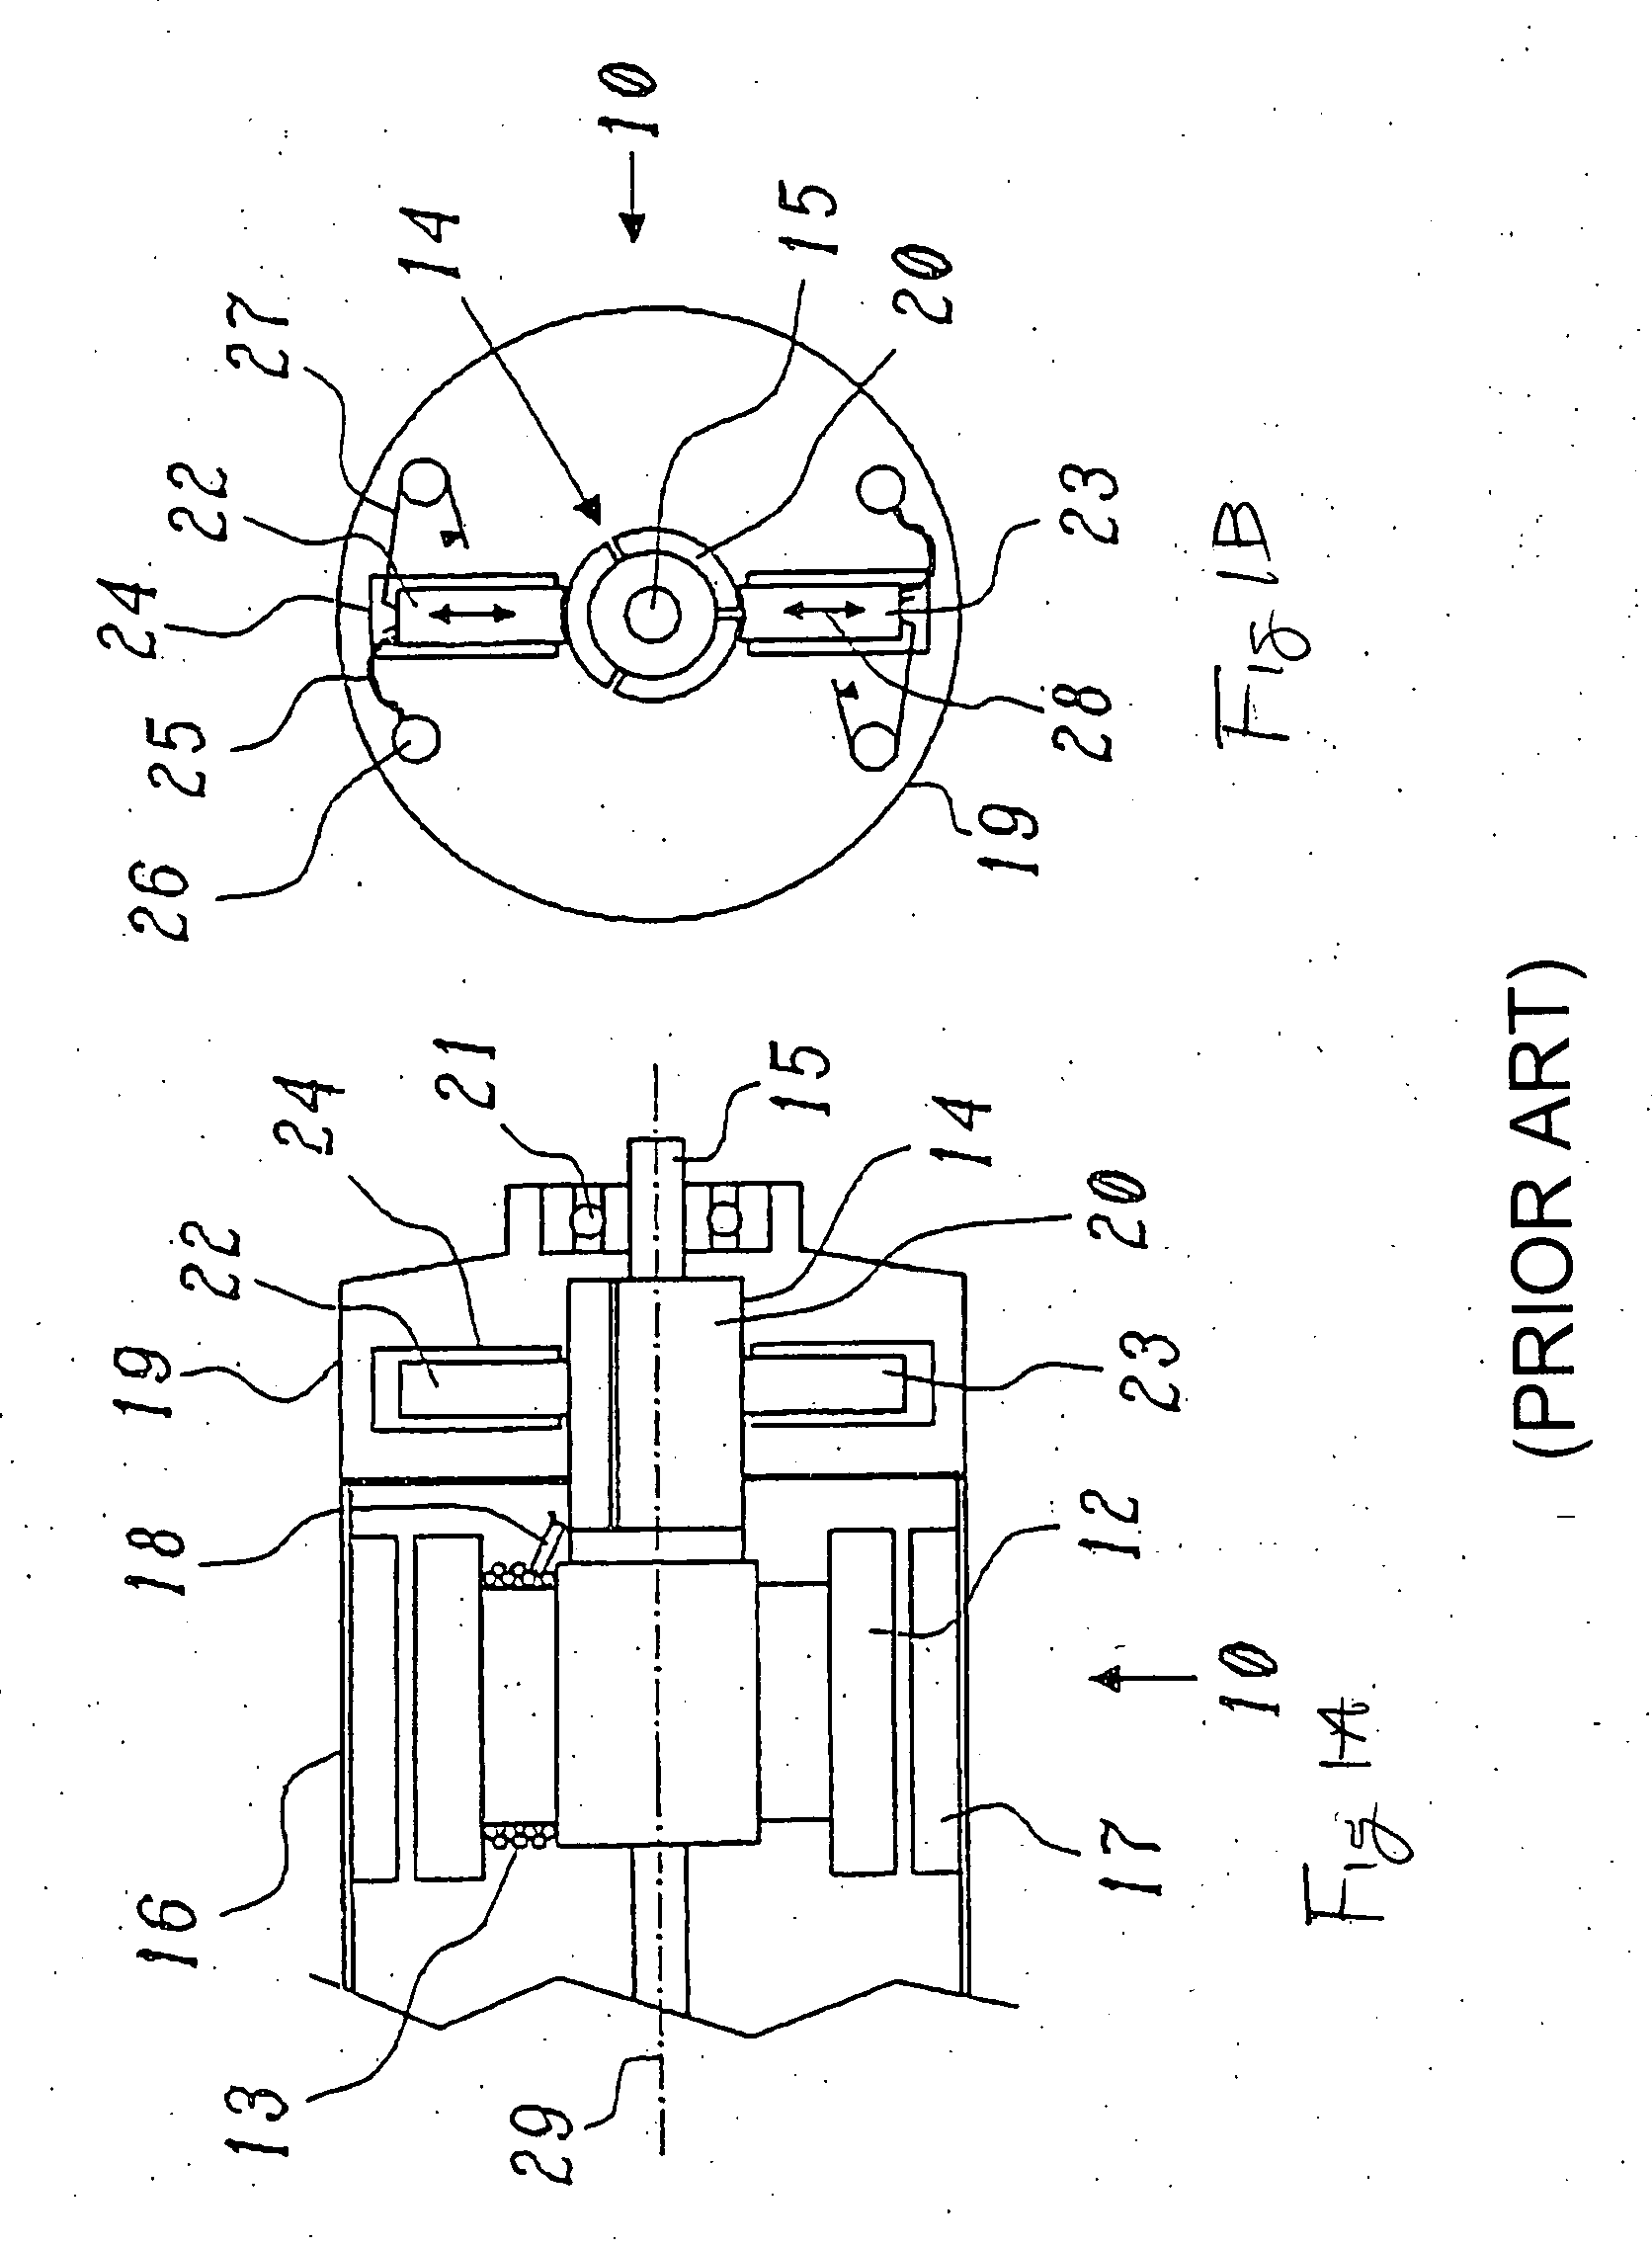 High-power direct current engine comprising a collector and carbon brushes for a racing car serving as prototype